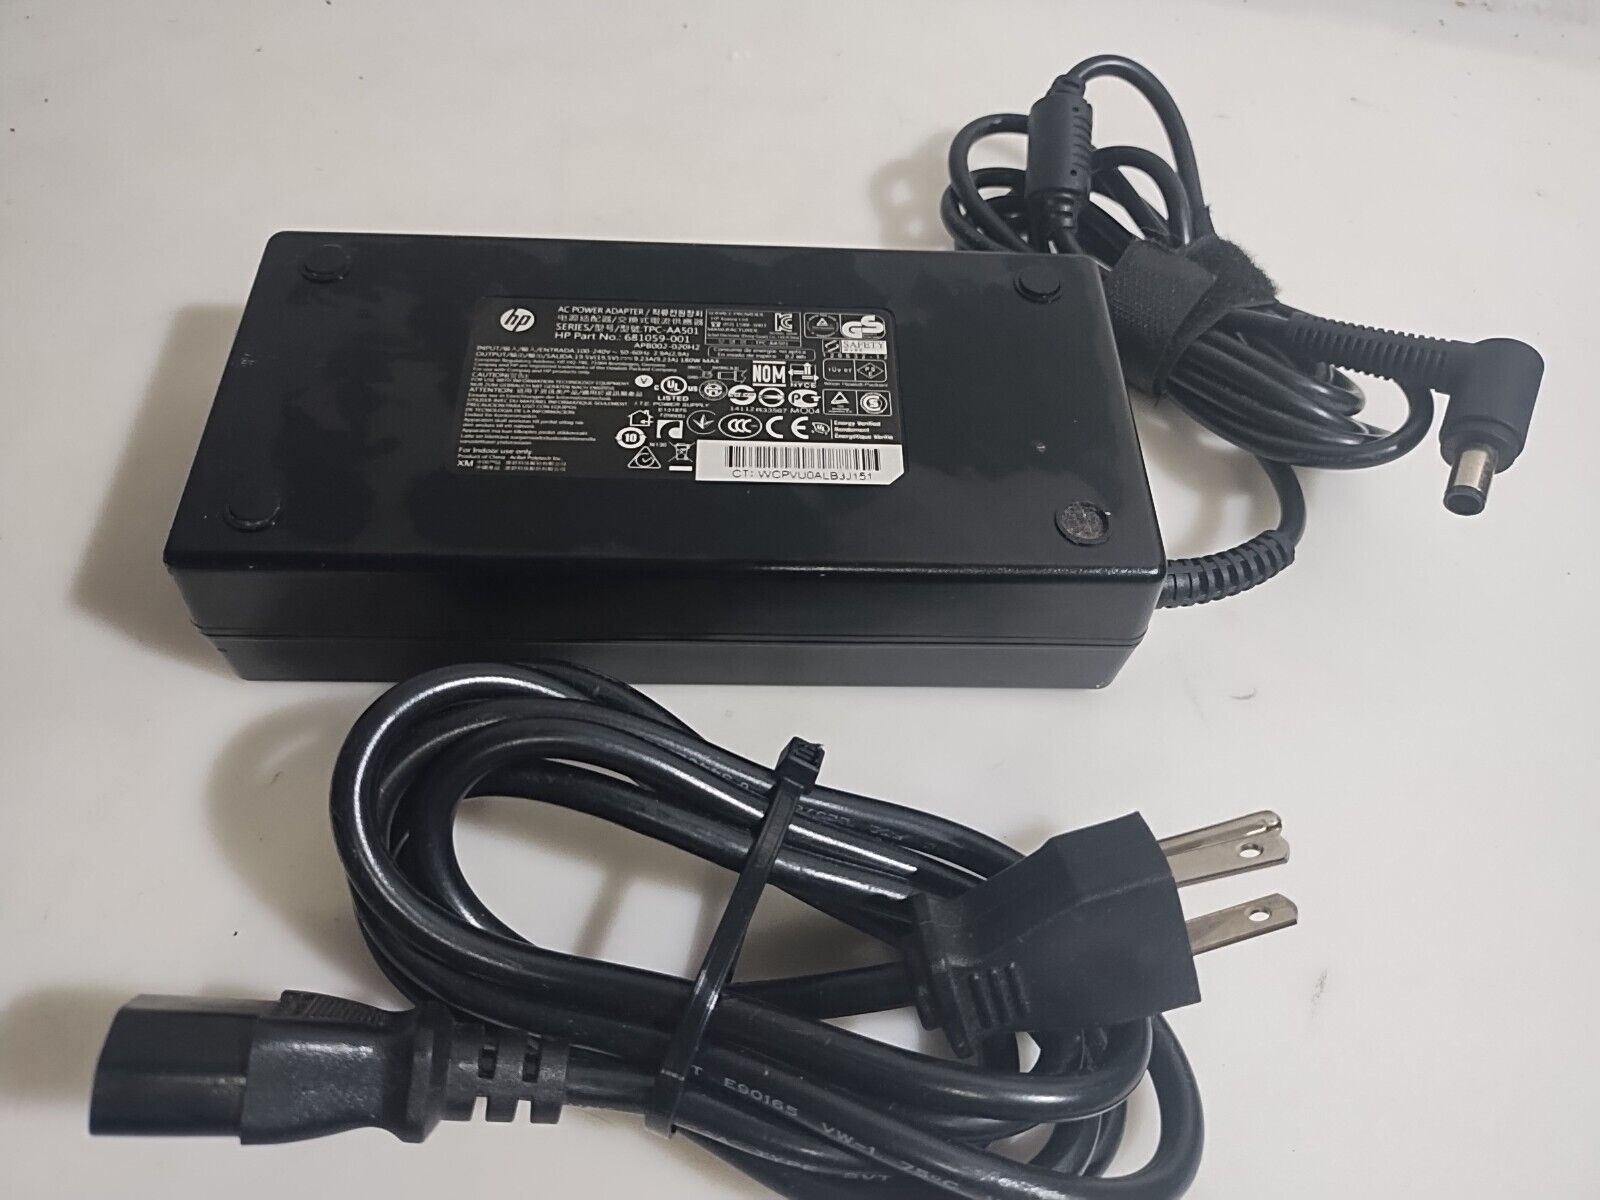 Original HP 180W AC DC POWER ADAPTER For 681059-001 Power Supply Charger Cord